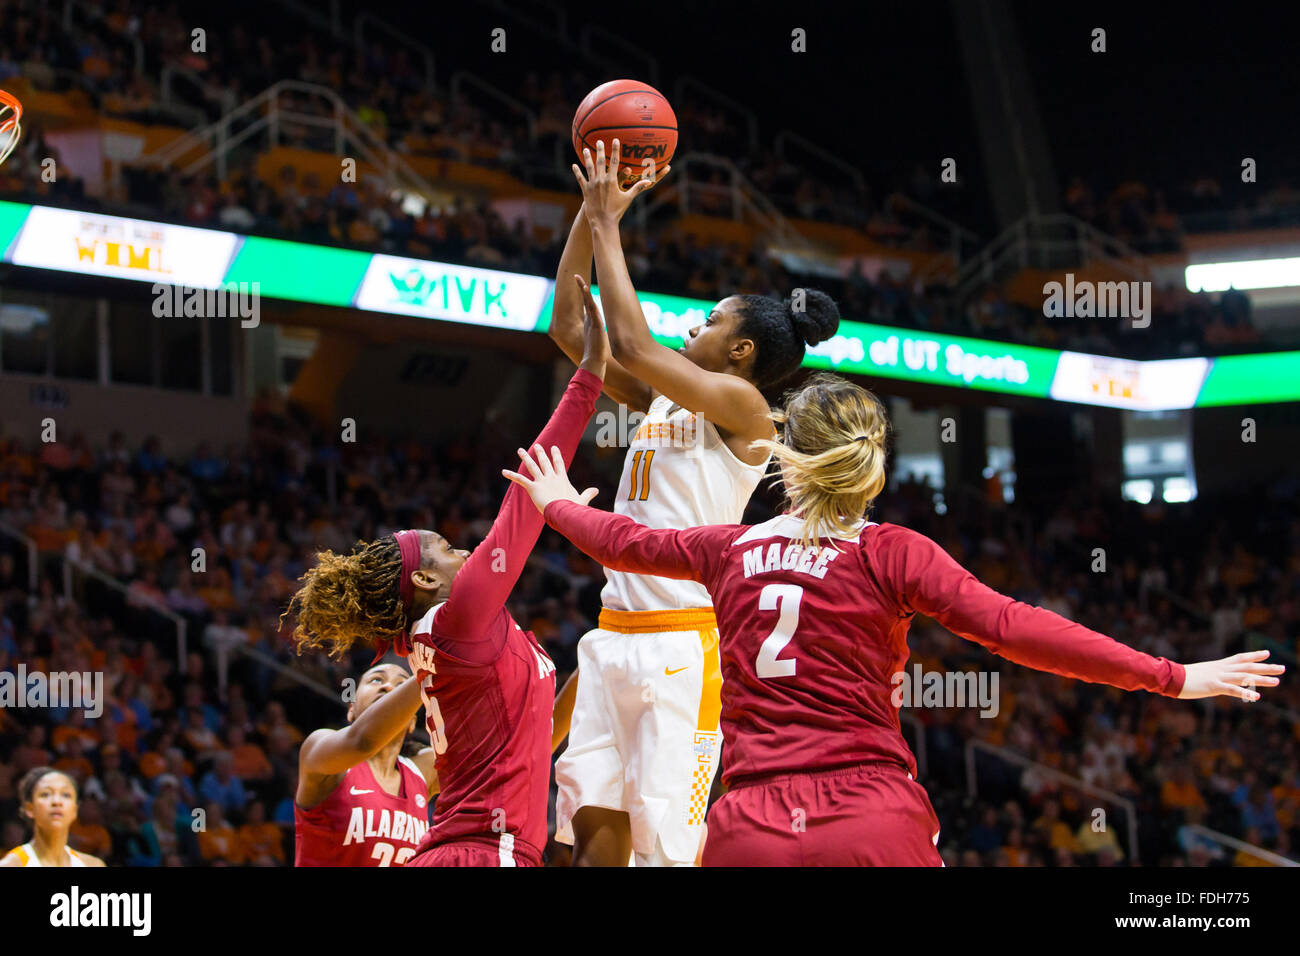 January 31, 2016: Diamond DeShields #11 of the Tennessee Lady Volunteers shoots the ball over Diamante Martinez #35 of the Alabama Crimson Tide during the NCAA basketball game between the University of Tennessee Lady Volunteers and the University of Alabama Crimson Tide at Thompson Boling Arena in Knoxville TN Tim Gangloff/CSM Stock Photo